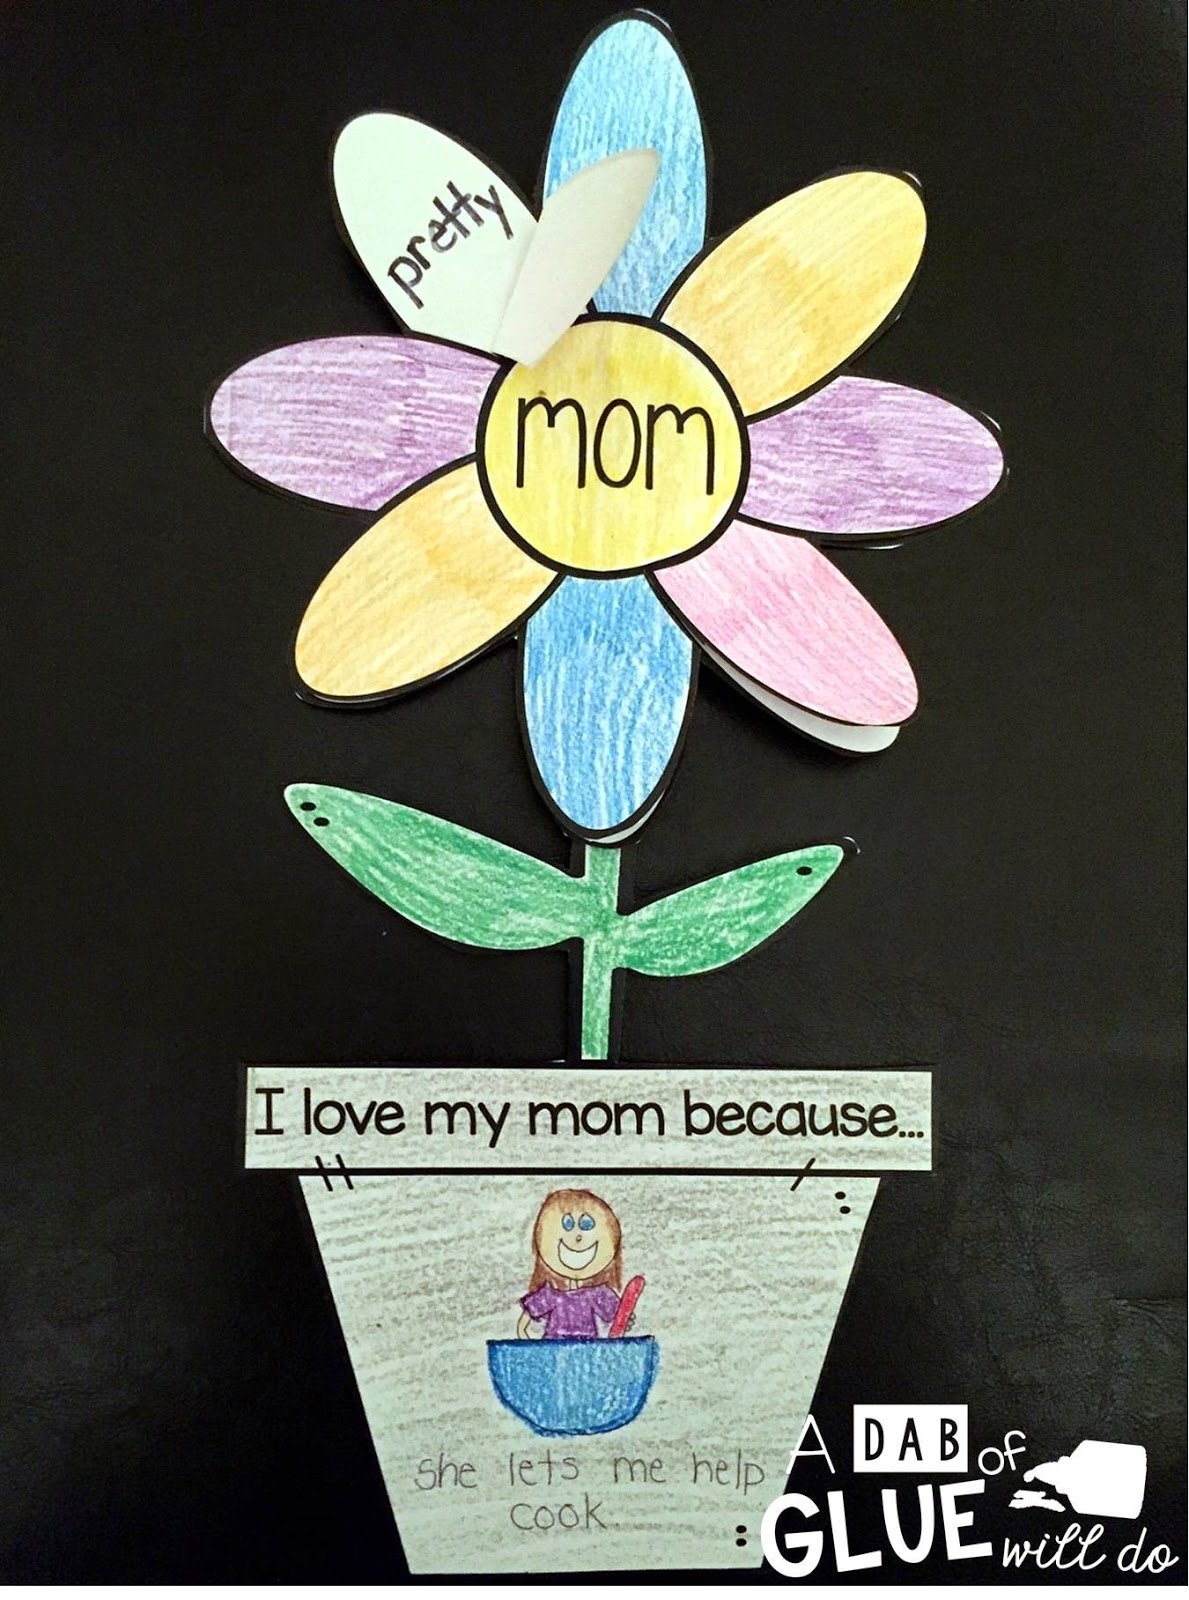 10 Fashionable Mothers Day Ideas For Preschoolers mothers day crafts gift ideas great for preschool little kids 2023